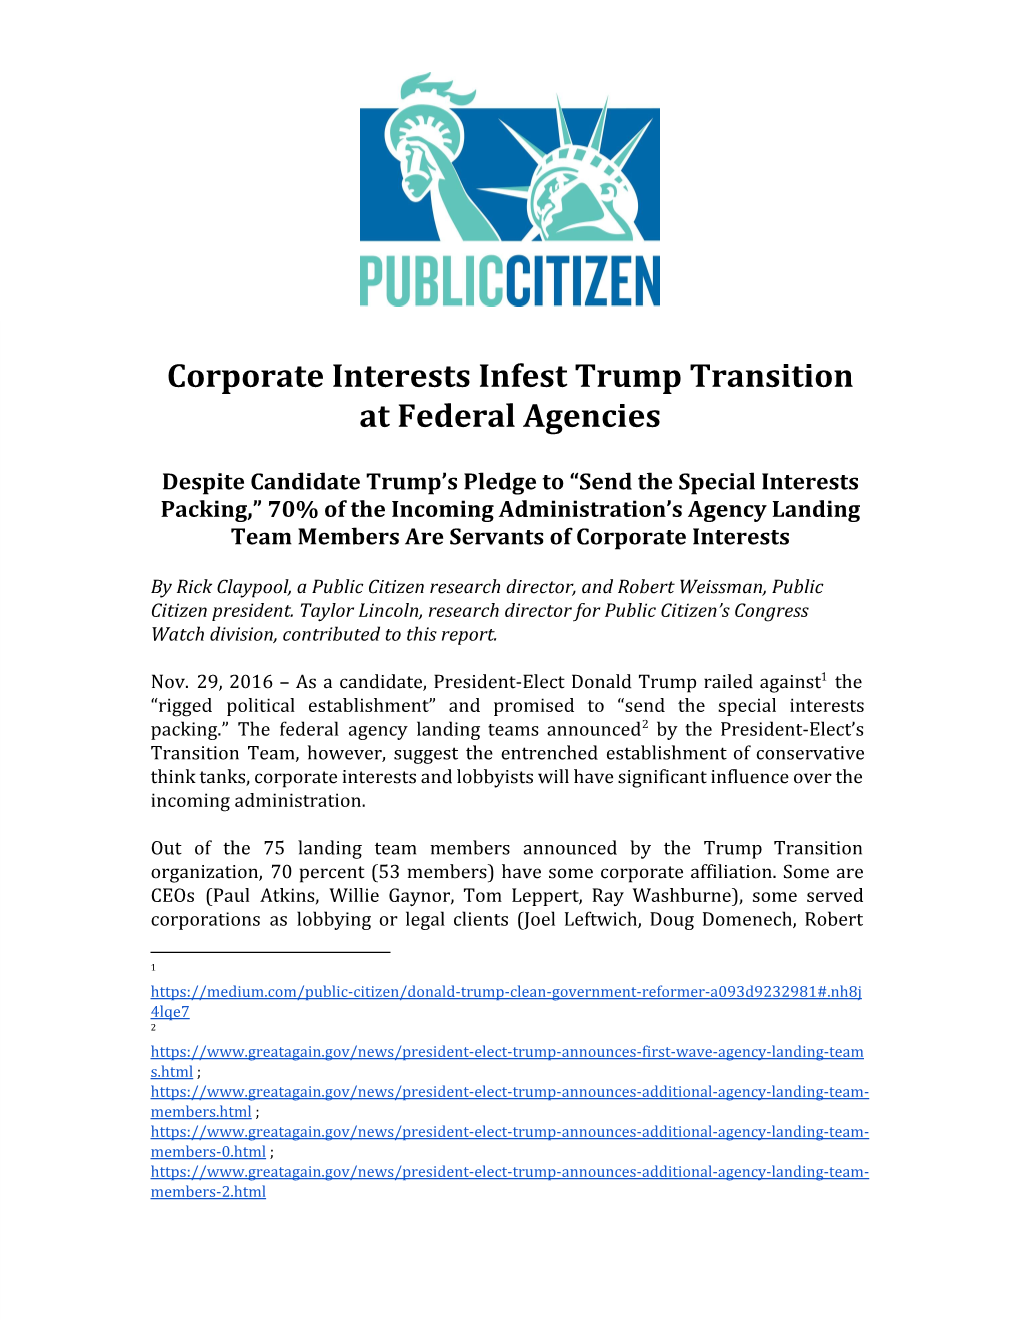 Corporate Interests Infest Trump Transition at Federal Agencies